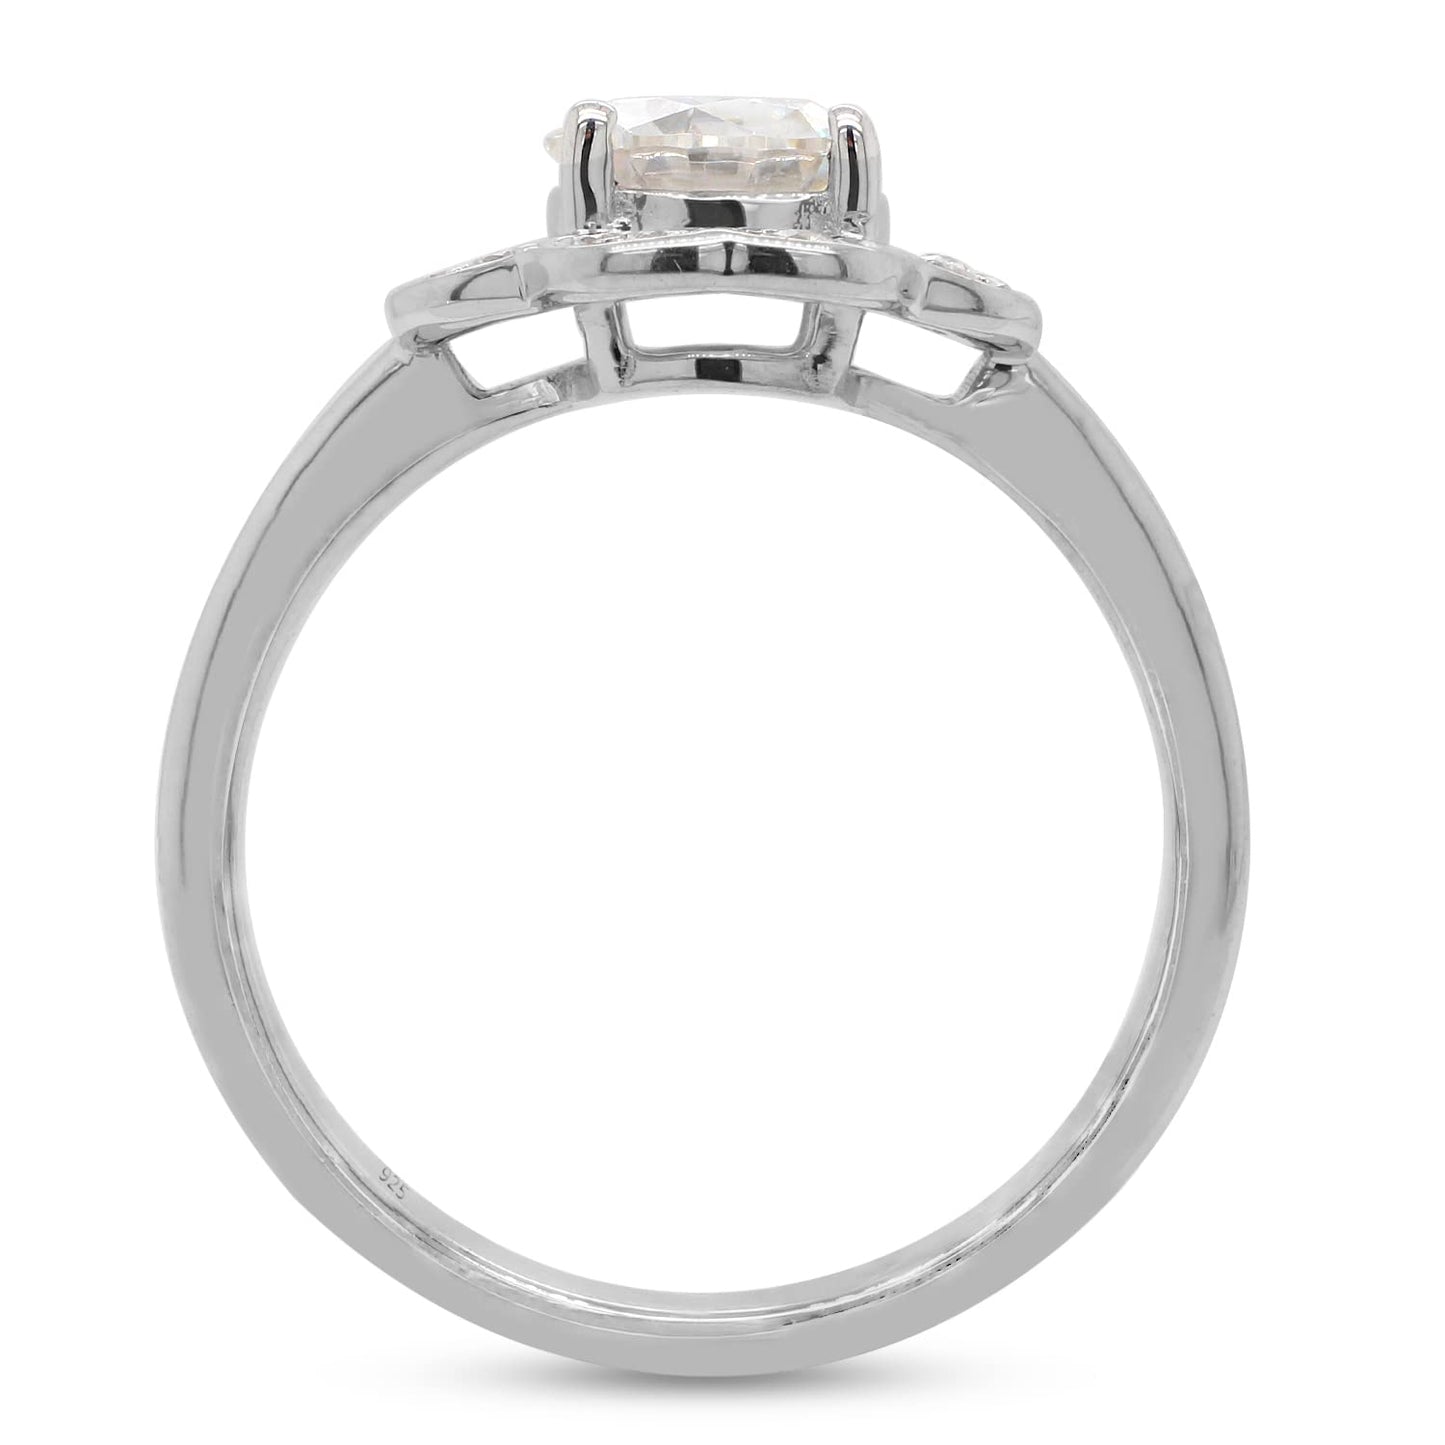 Load image into Gallery viewer, 6.5MM Round Cut Lab Created Moissanite Diamond Solitaire Halo Engagement Ring for Women in 925 Sterling Silver (1.10 Cttw)
